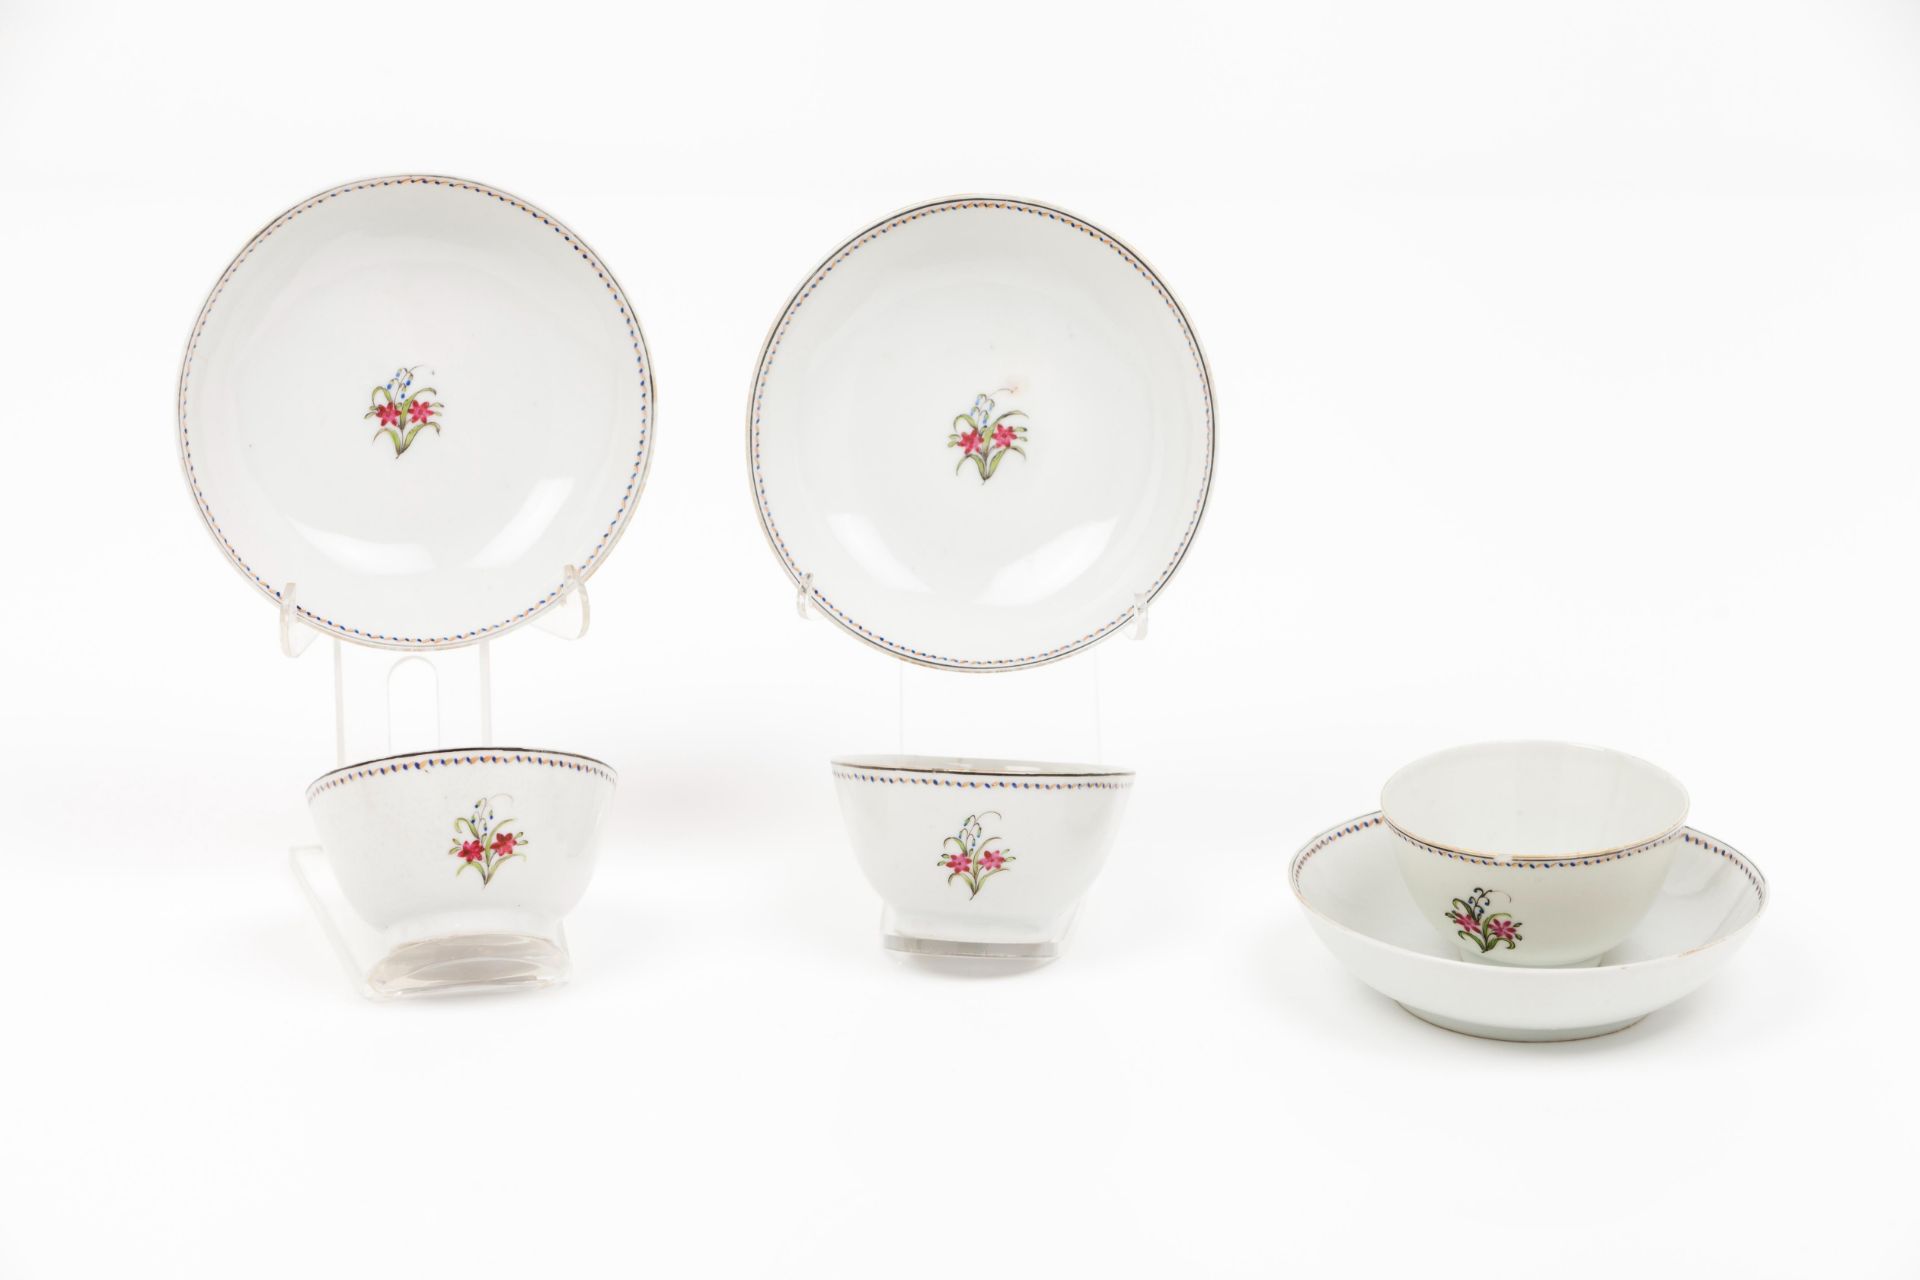 A set of three cups and saucers